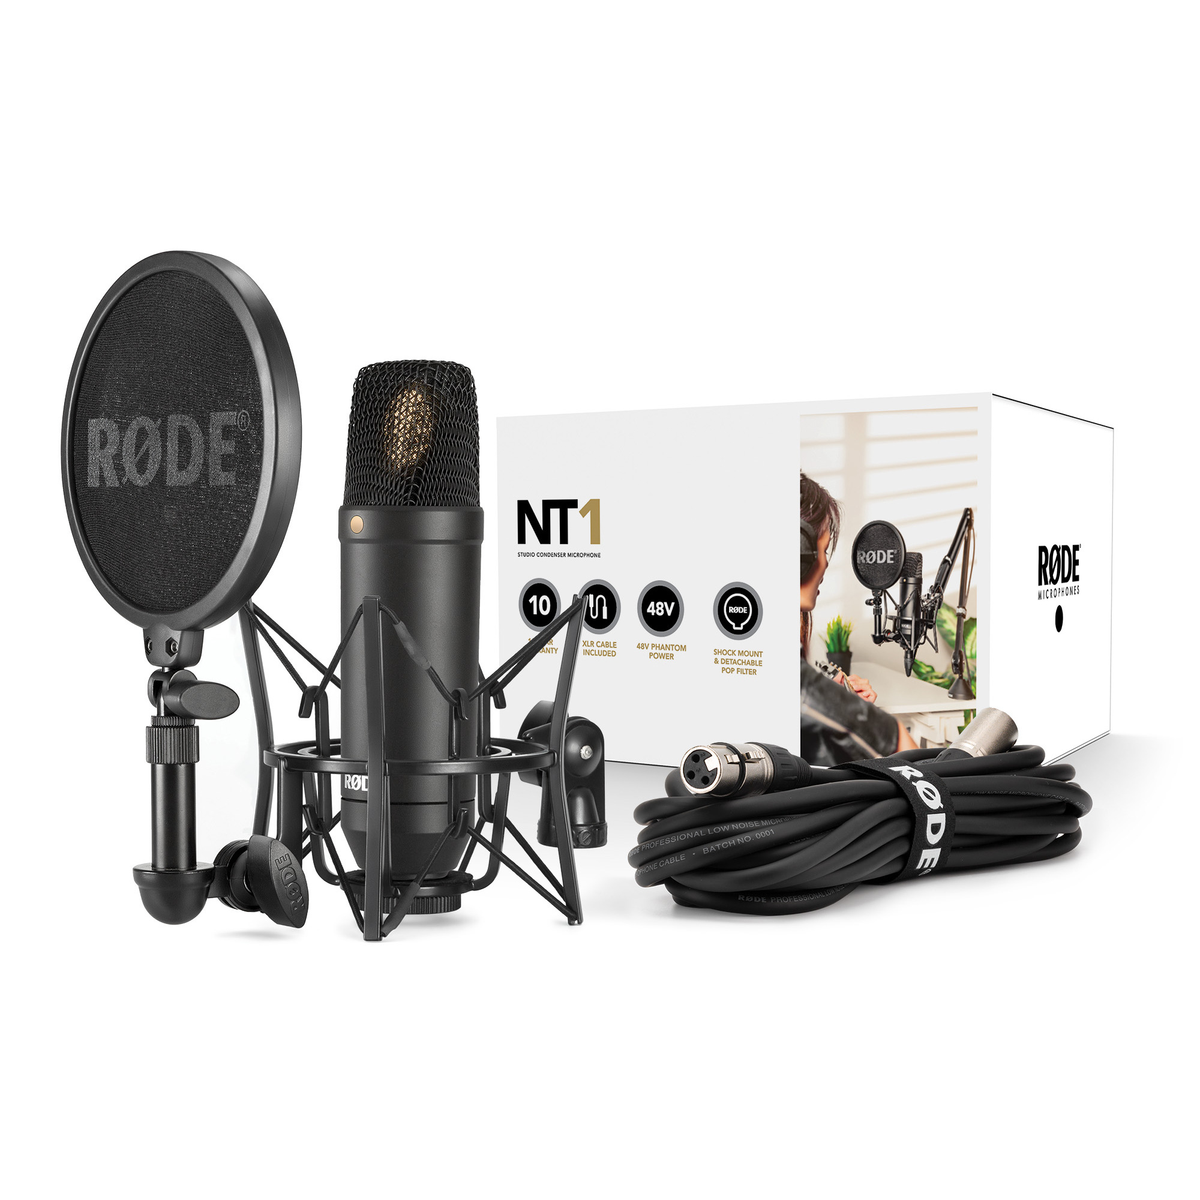 Buy Rode NT1 Cardioid Condenser Microphone Kit with SM6 Shock Mount Online